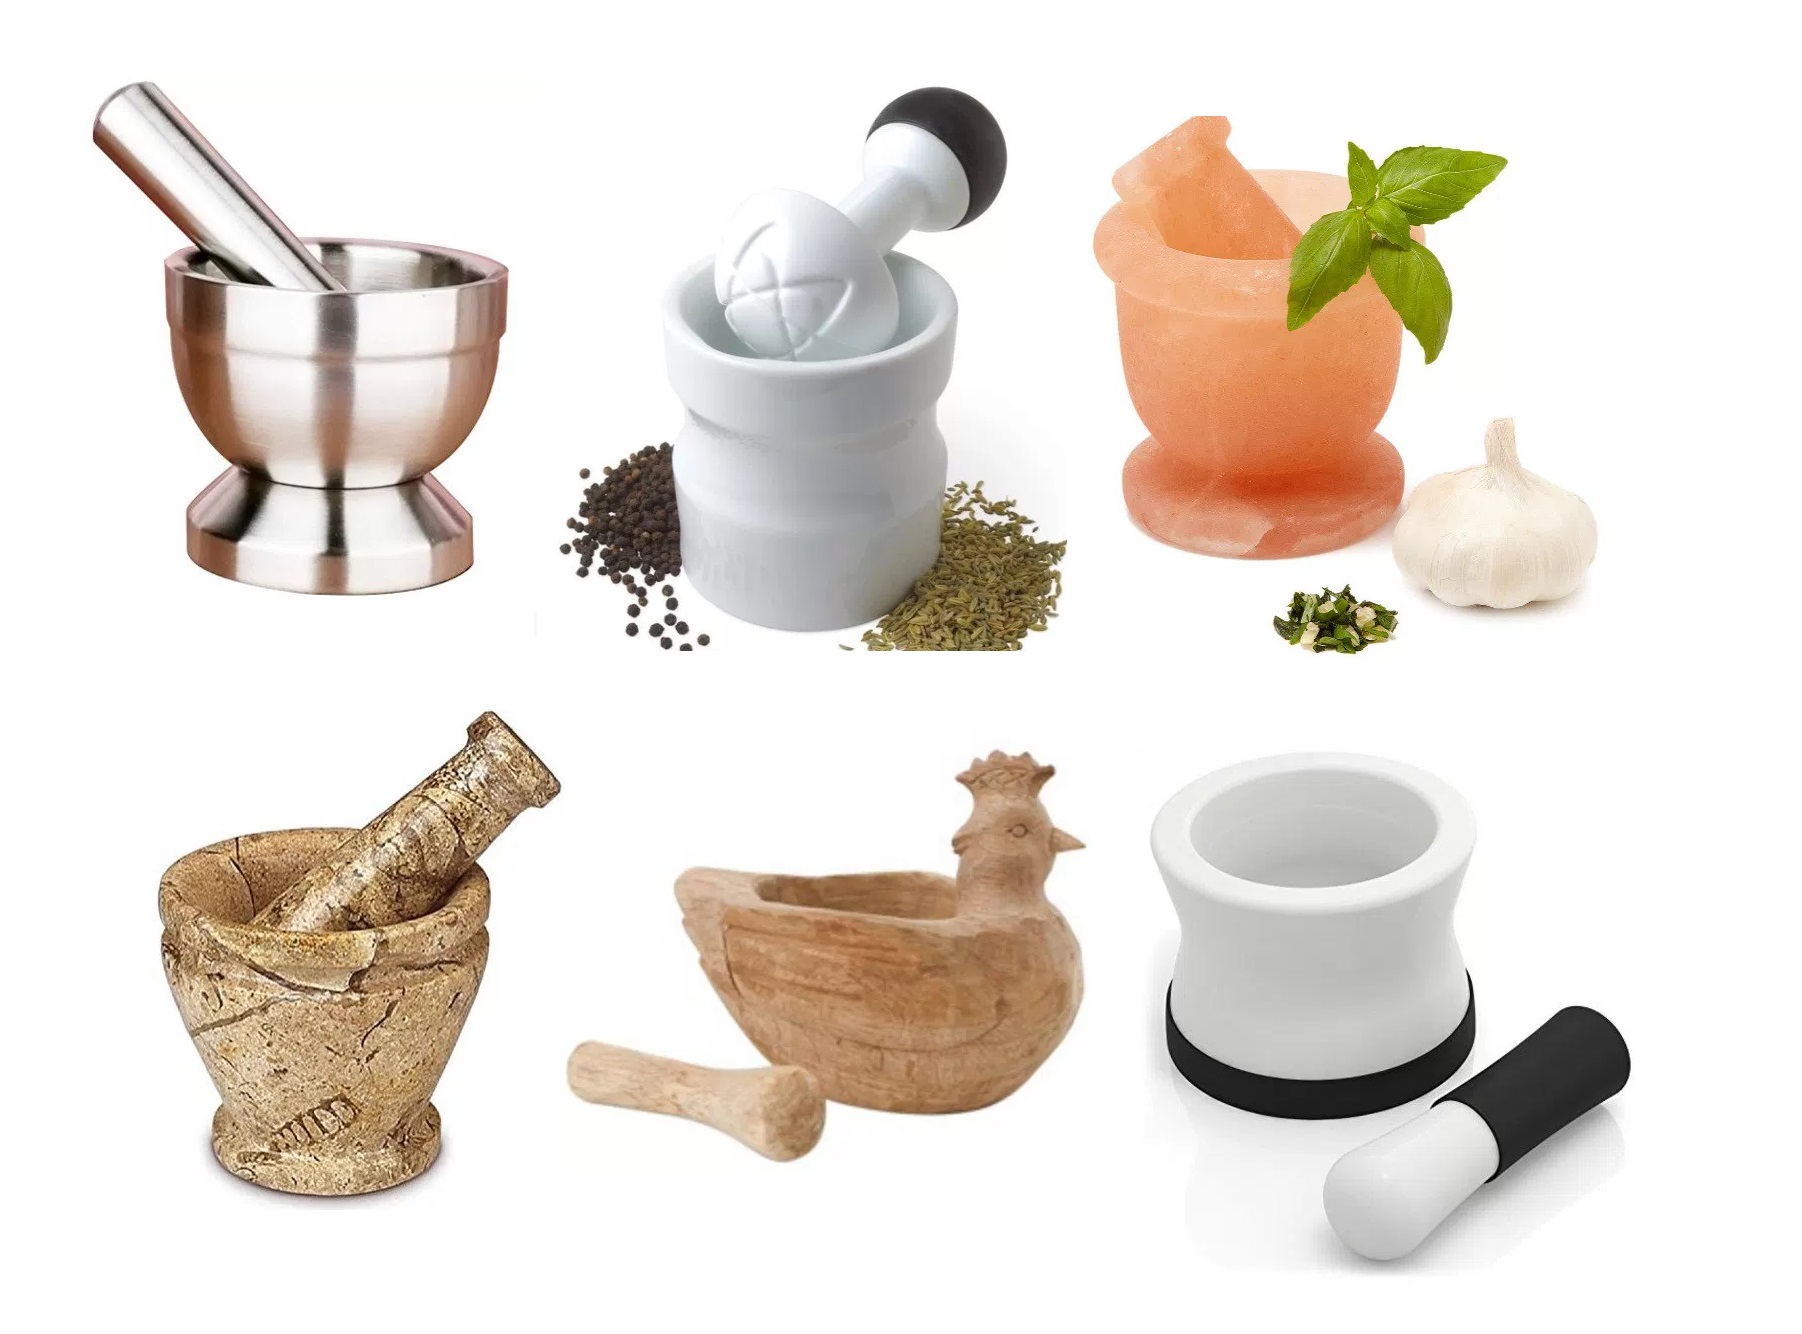 Top 10 Amazing, Novelty and Unusual Mortar & Pestle Sets